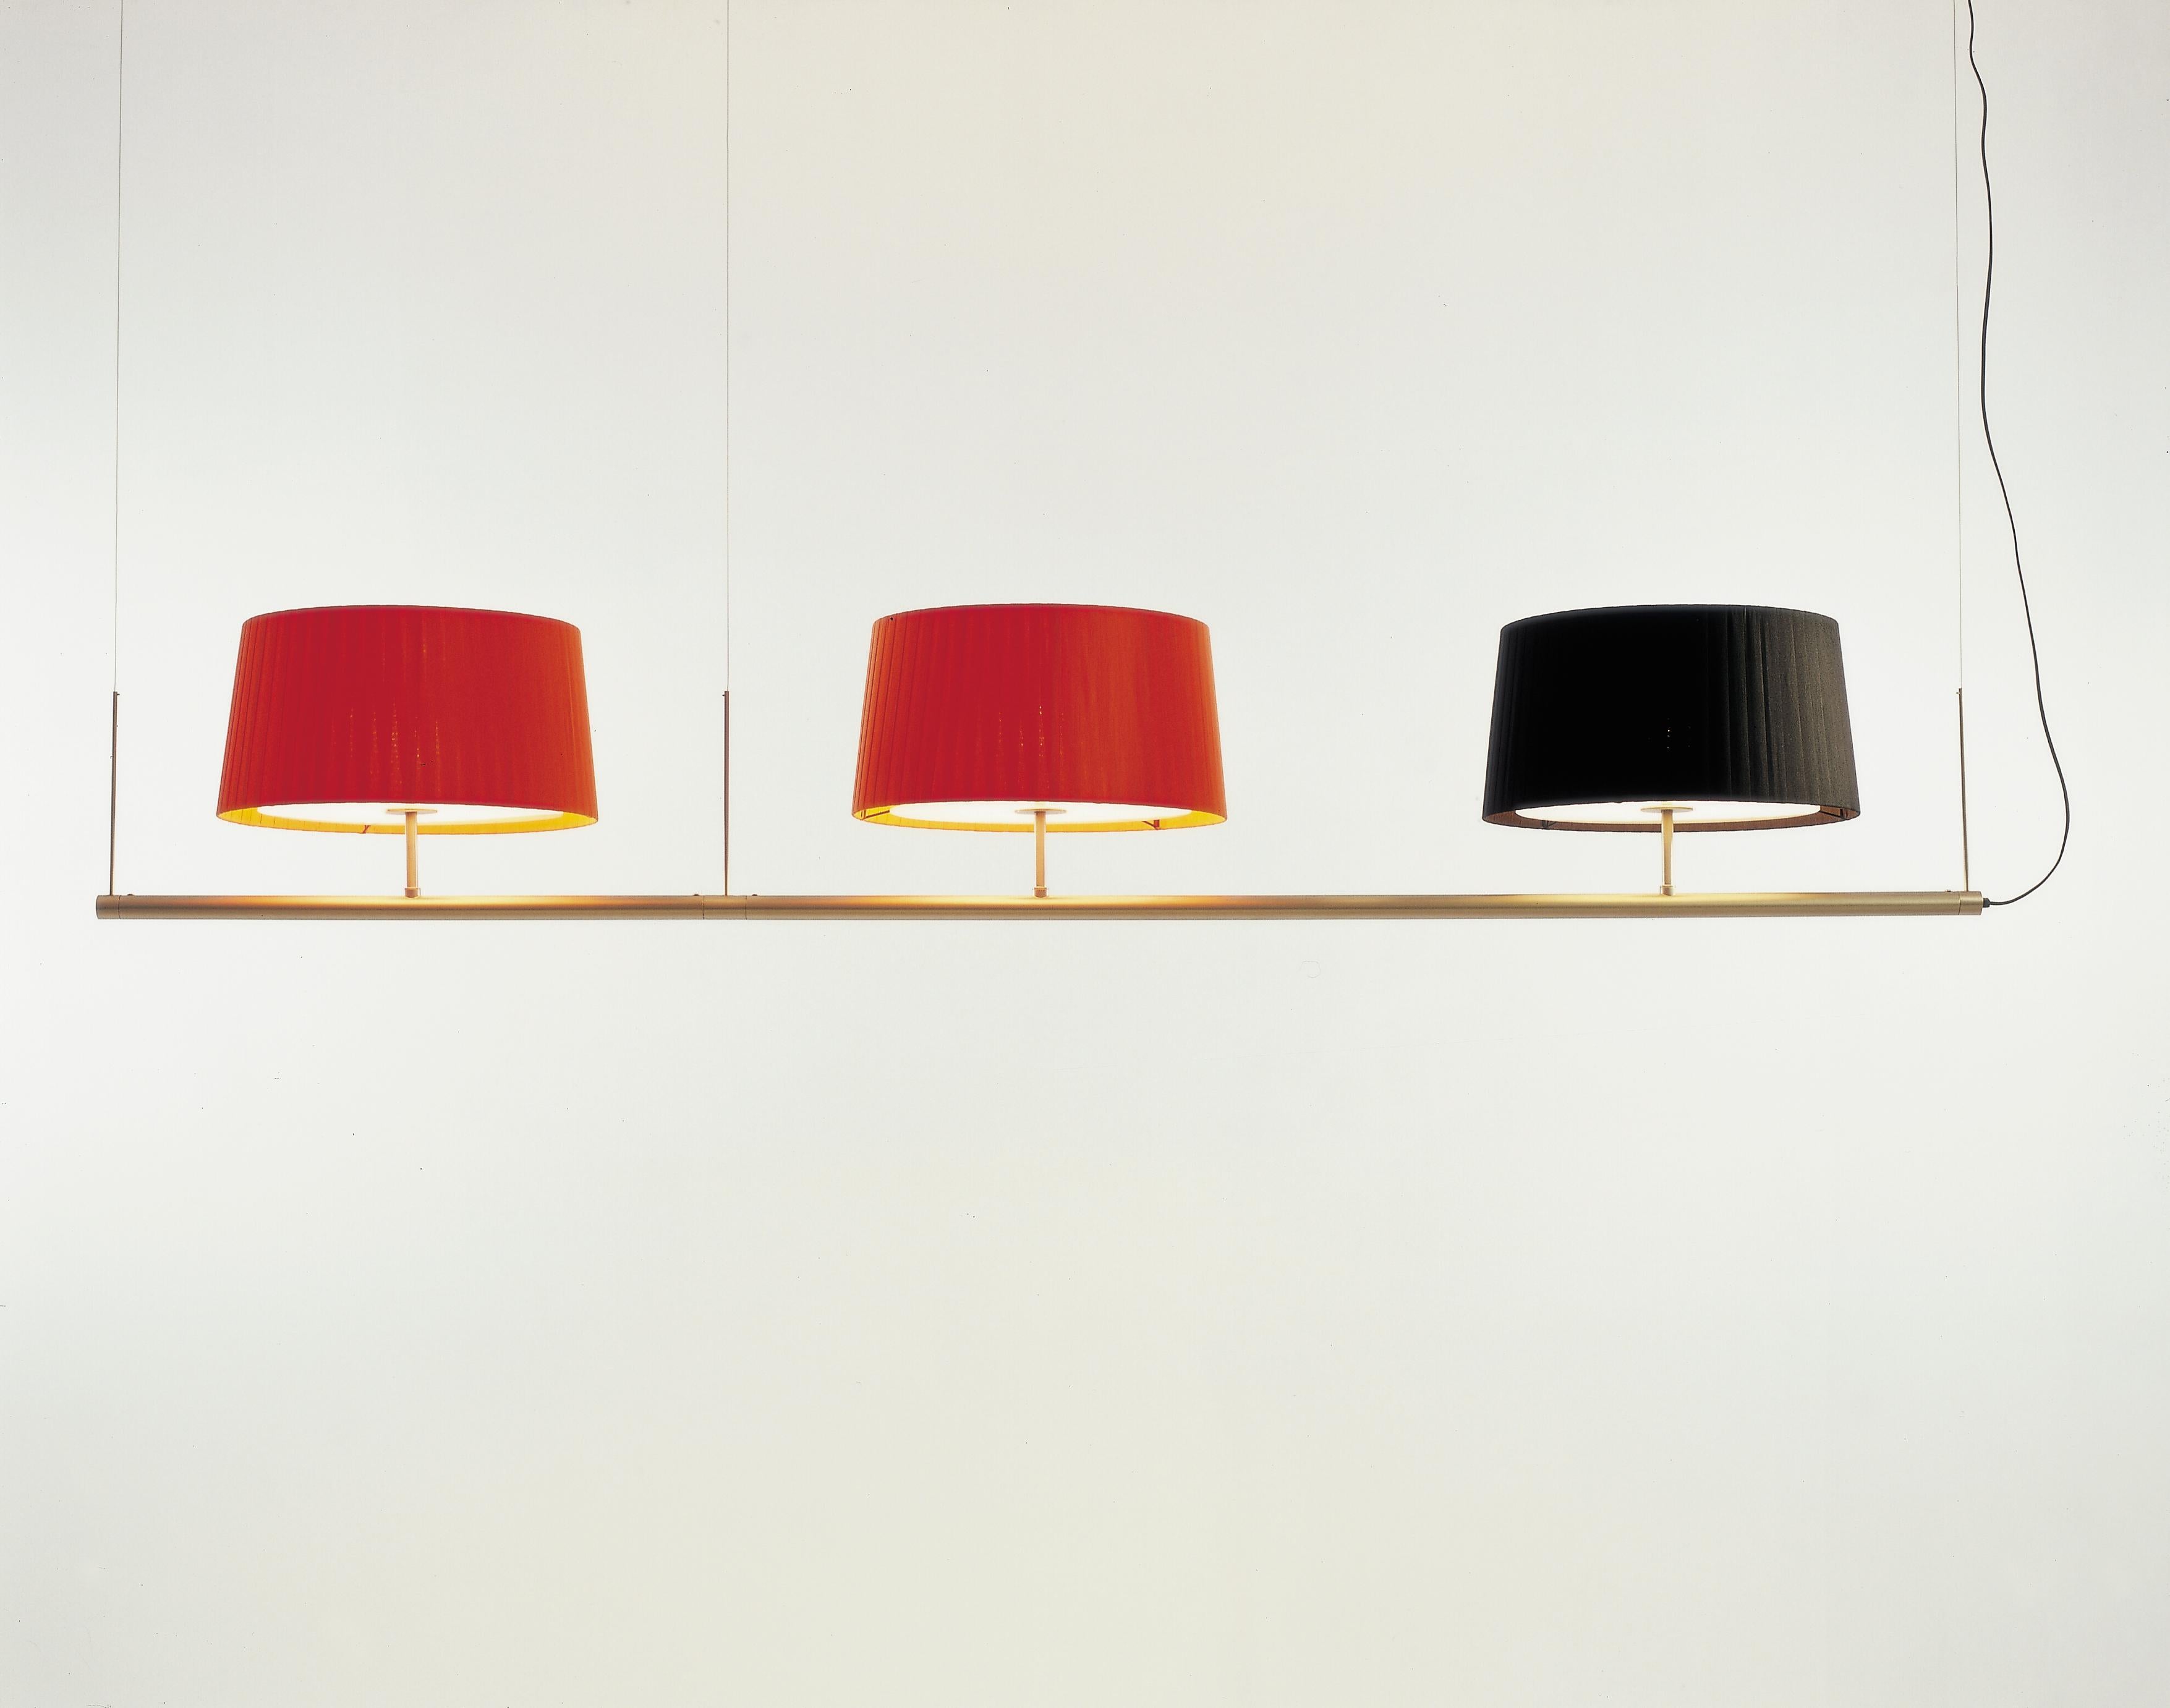 Sistema Gran Fonda Pendant Lamp II by Gabriel Ordeig Cole.
Dimensions: D 45 x W 223 x H 35 cm
Materials: Metal, ribbon.
Lampshades: 2x Red and 1x Black.
Available in other lampshade colors.
Available in multiple composition